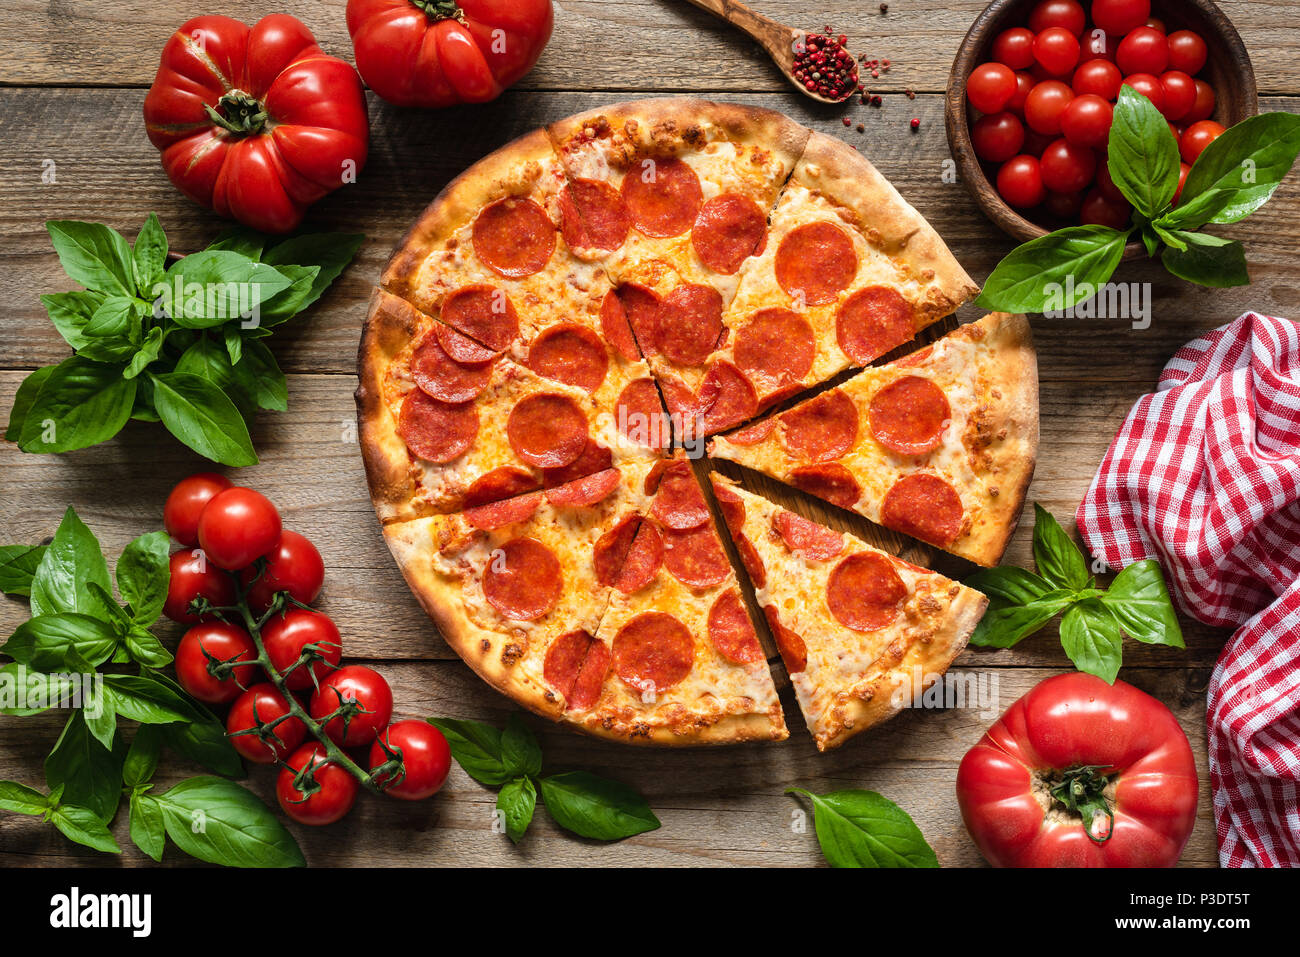 Pepperoni pizza, tomatoes and basil. Tasty pepperoni pizza on rustic wooden background. Overhead view of italian pizza Stock Photo